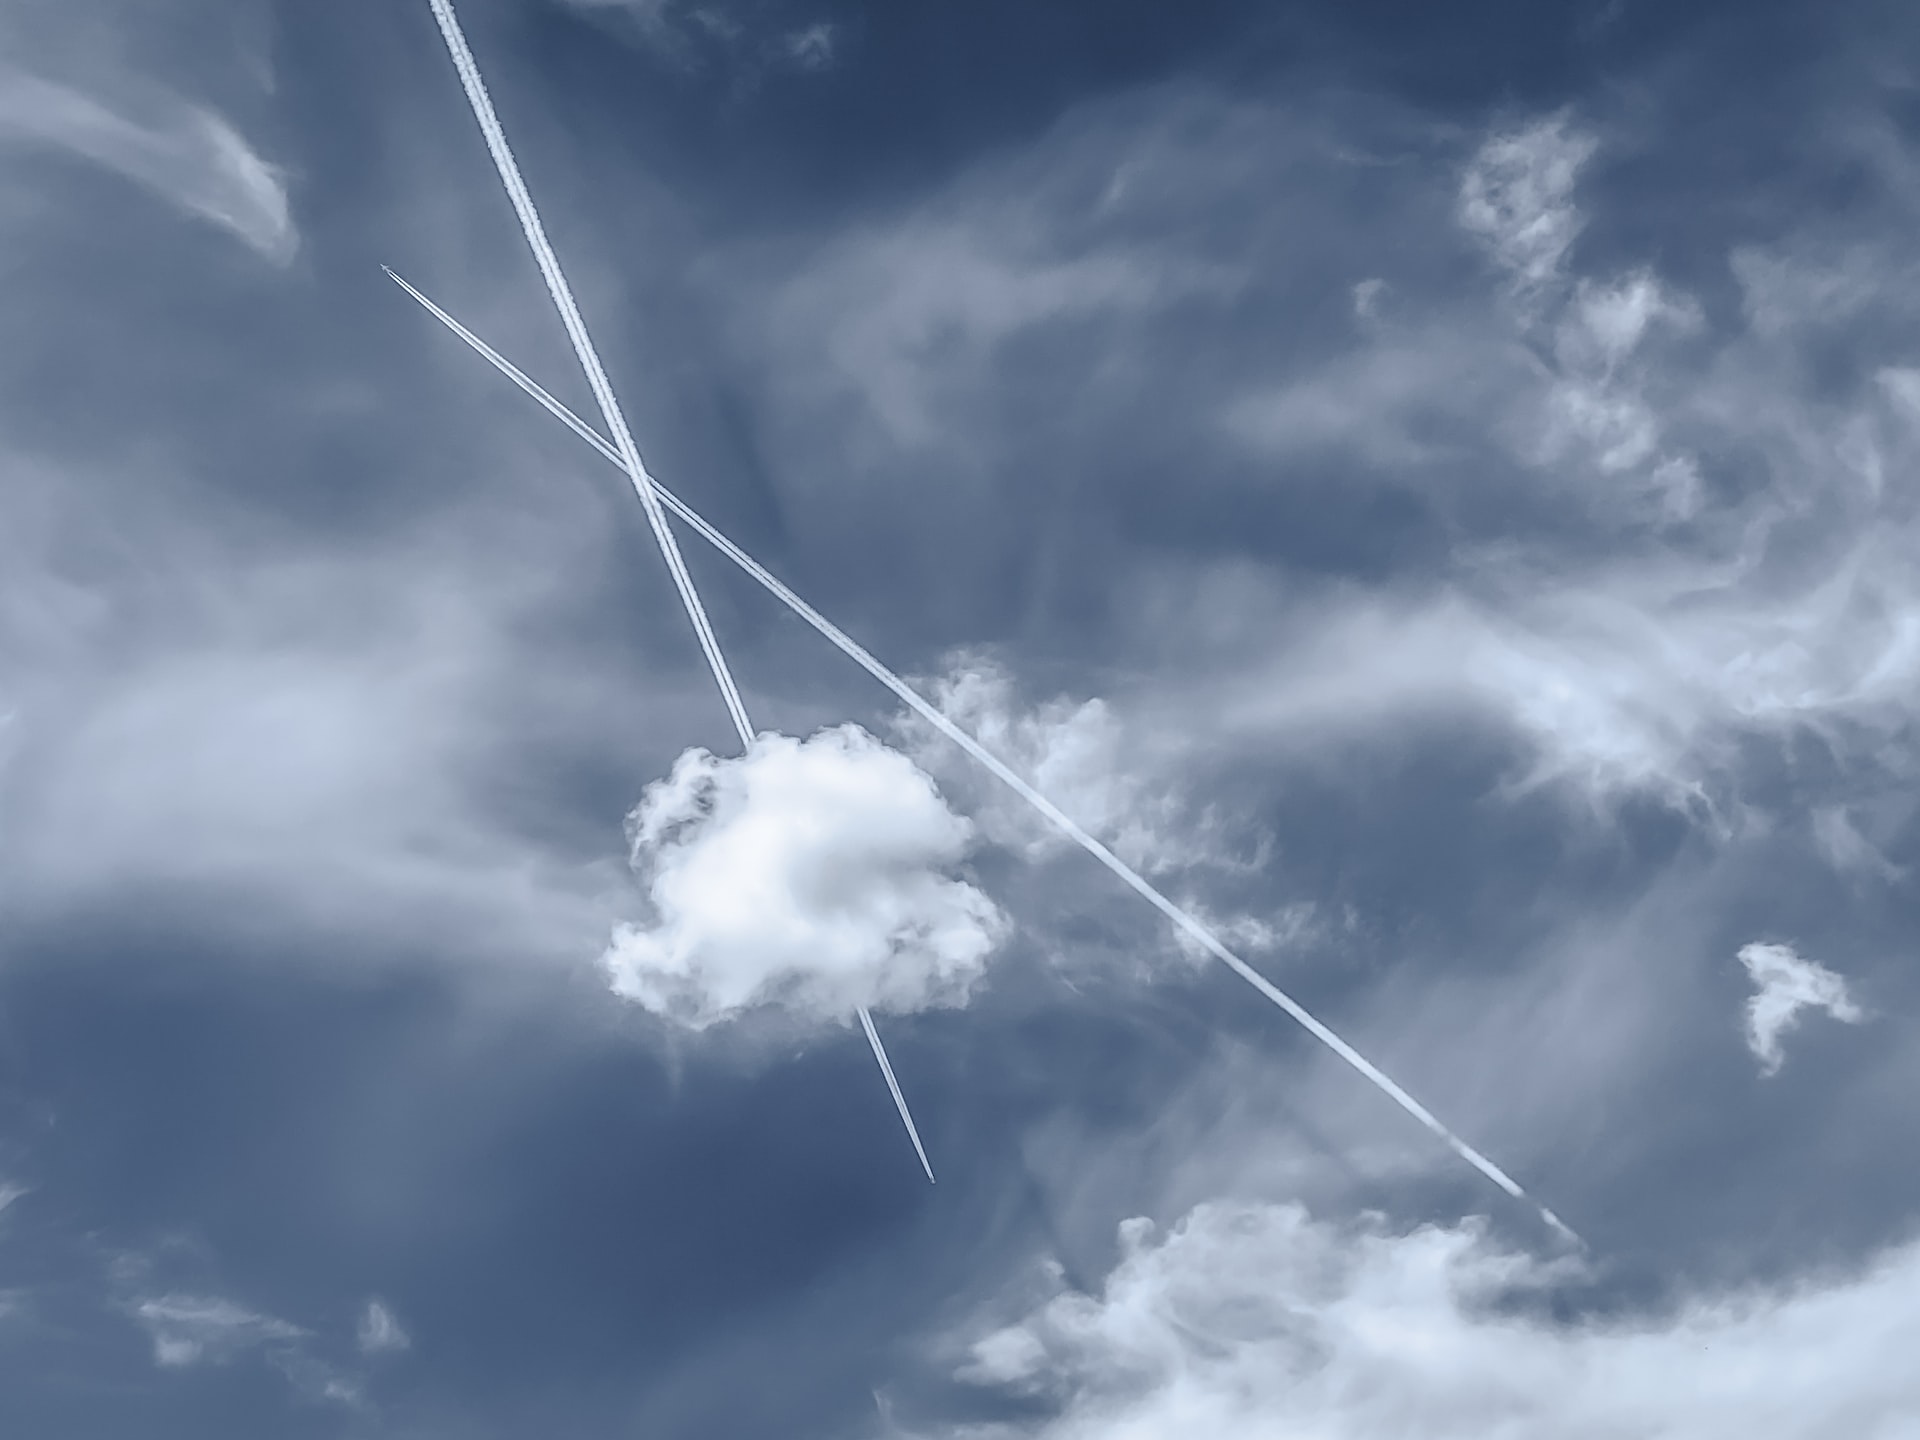 Two airplanes leaving trails in the sky.